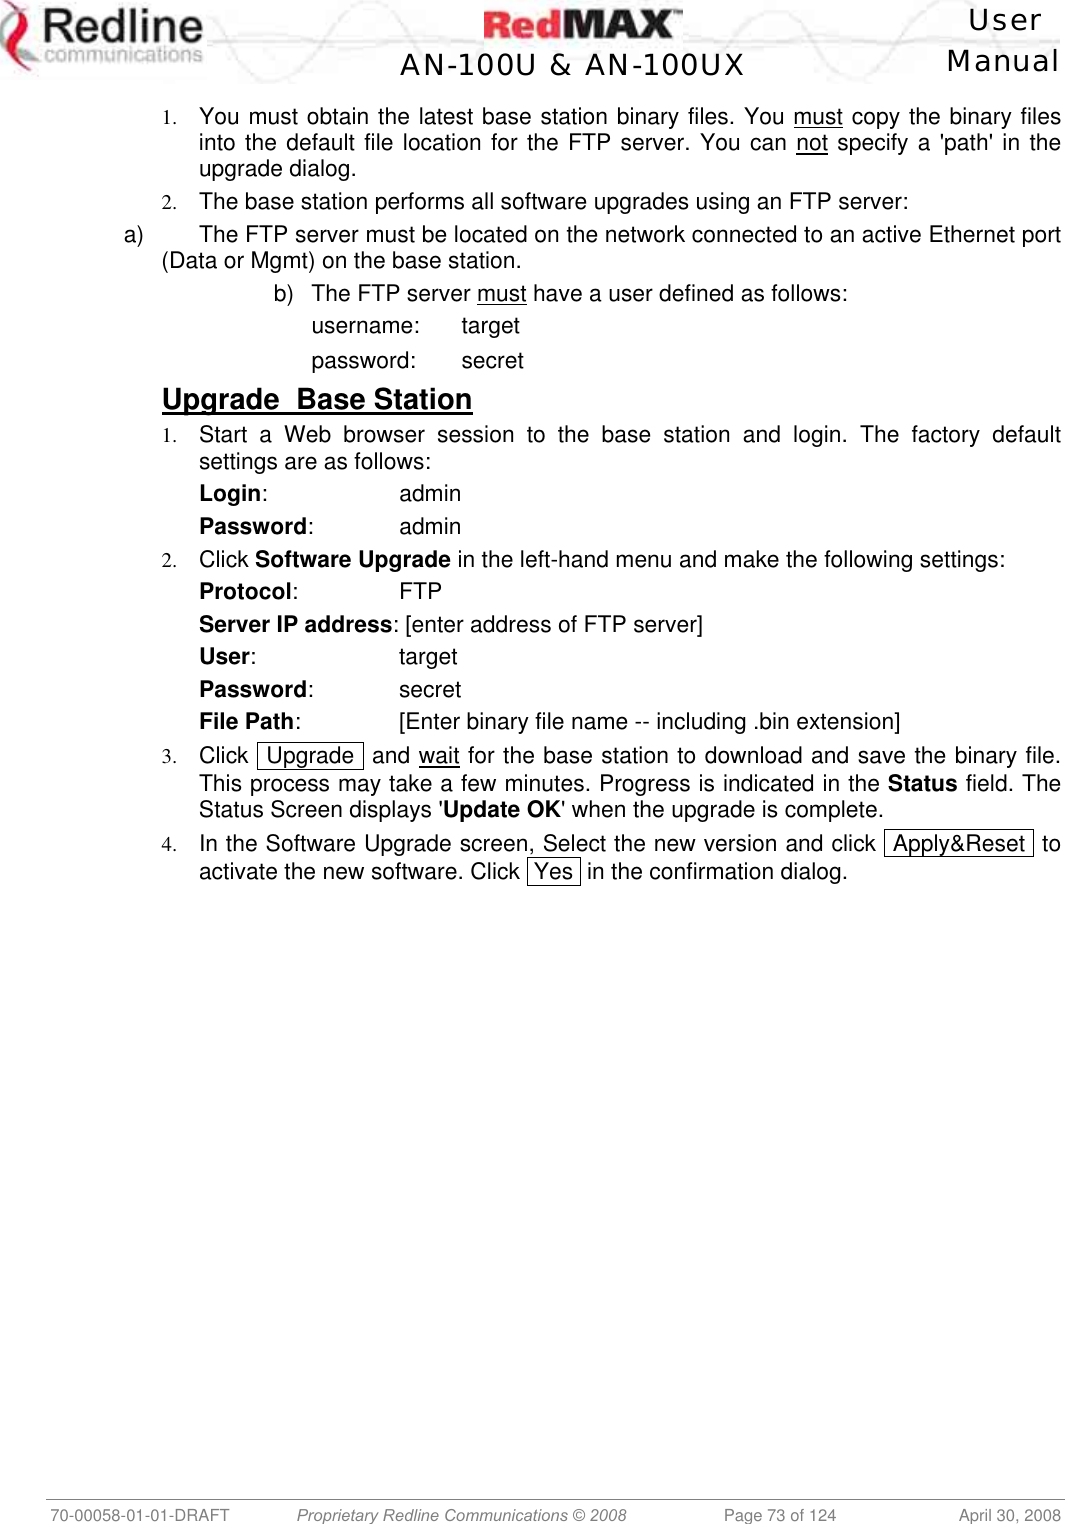    User  AN-100U &amp; AN-100UX Manual   70-00058-01-01-DRAFT  Proprietary Redline Communications © 2008   Page 73 of 124  April 30, 2008 1.  You must obtain the latest base station binary files. You must copy the binary files into the default file location for the FTP server. You can not specify a &apos;path&apos; in the upgrade dialog. 2.  The base station performs all software upgrades using an FTP server: a)  The FTP server must be located on the network connected to an active Ethernet port (Data or Mgmt) on the base station. b)  The FTP server must have a user defined as follows:   username: target   password: secret Upgrade  Base Station 1.  Start a Web browser session to the base station and login. The factory default settings are as follows: Login:      admin Password:      admin 2.  Click Software Upgrade in the left-hand menu and make the following settings: Protocol:   FTP Server IP address: [enter address of FTP server] User:  target Password:   secret File Path:    [Enter binary file name -- including .bin extension]   3.  Click  Upgrade  and wait for the base station to download and save the binary file. This process may take a few minutes. Progress is indicated in the Status field. The Status Screen displays &apos;Update OK&apos; when the upgrade is complete. 4.  In the Software Upgrade screen, Select the new version and click  Apply&amp;Reset  to activate the new software. Click  Yes  in the confirmation dialog. 